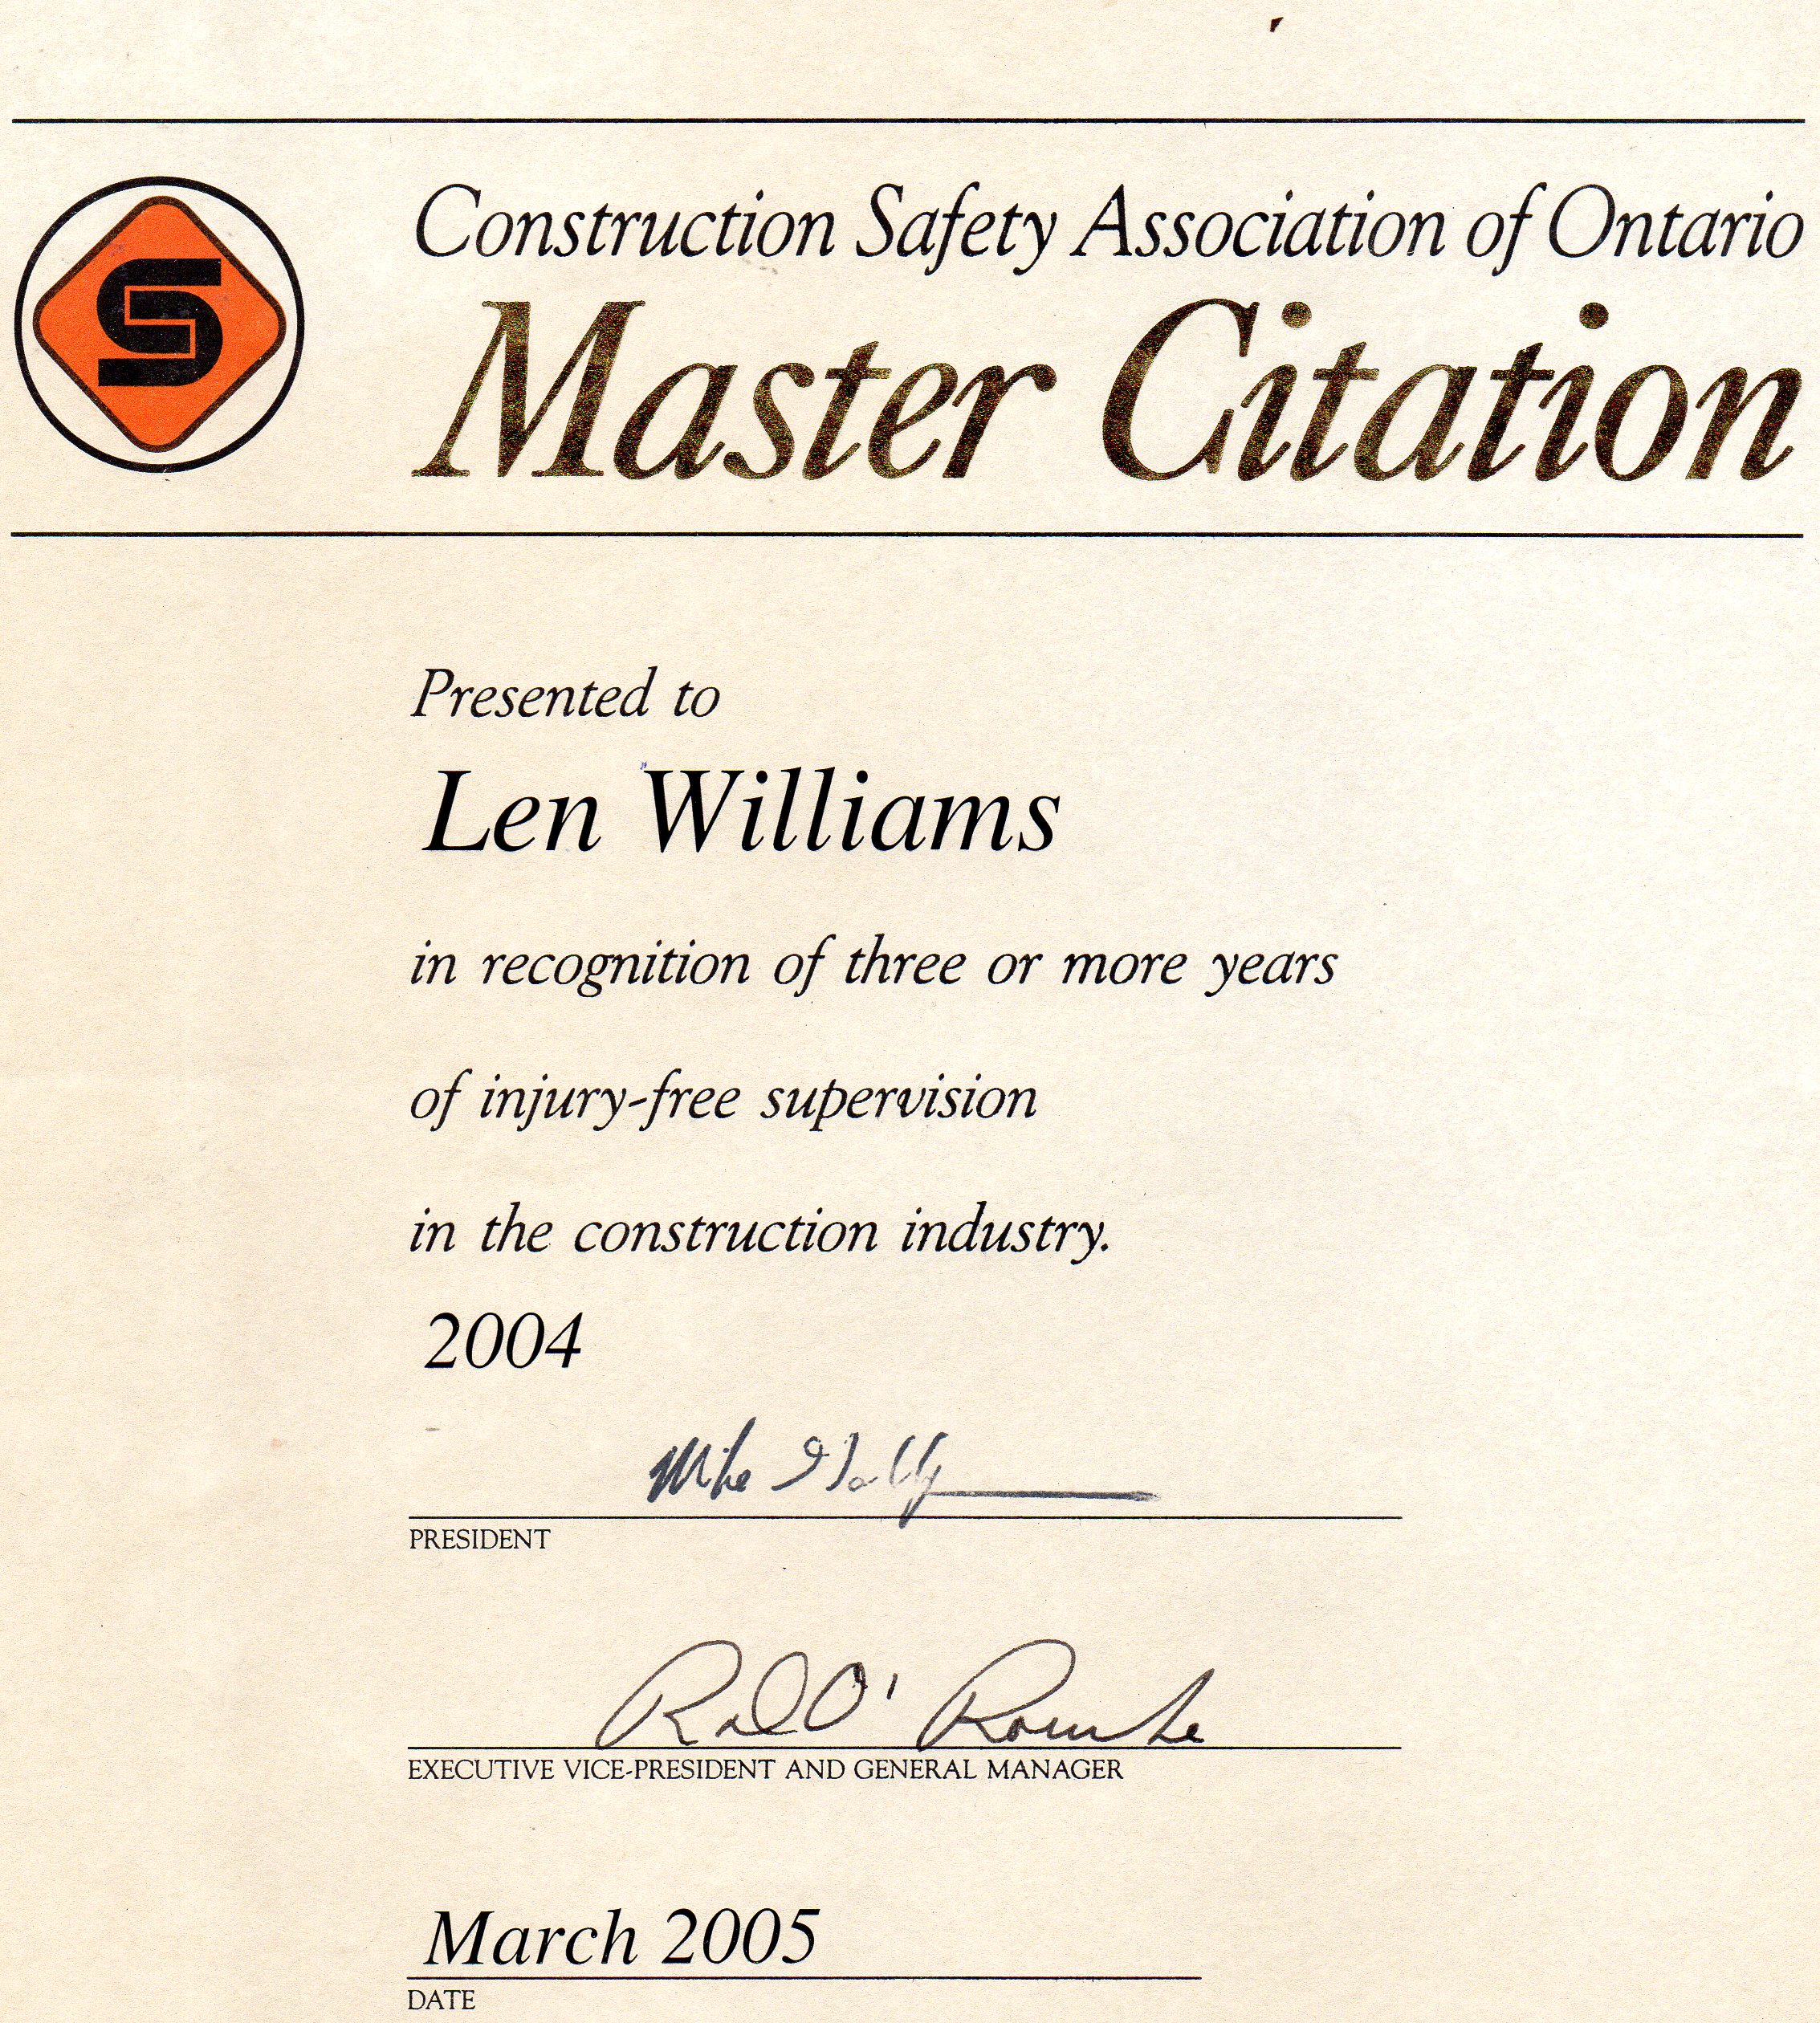 Construction Safety Association of Ontario

> Master Citation

Presented to

Len Williams

In recognition of three or more years
of mjury-free supervision

in the construction industry.
2004
we ilo

PRESIDENT

07

EXECUTIVE VICE-PRESIDENT AND GENERAL MANAGER

March 2005

DATE